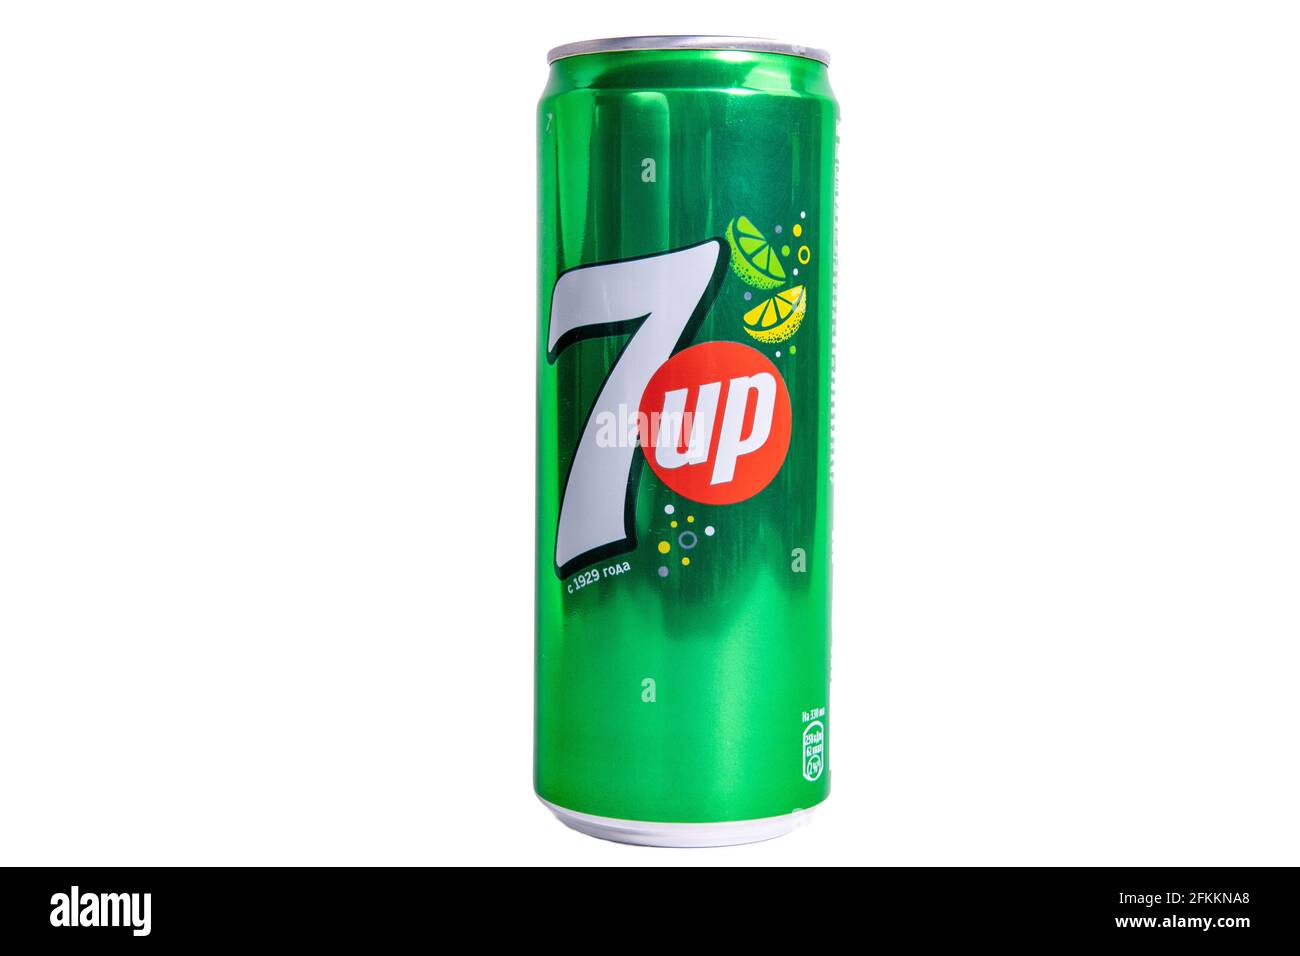 Tyumen, Russia-april 26, 2021: 7 Up is a brand of lemon-lime flavored isolated on white background. Stock Photo